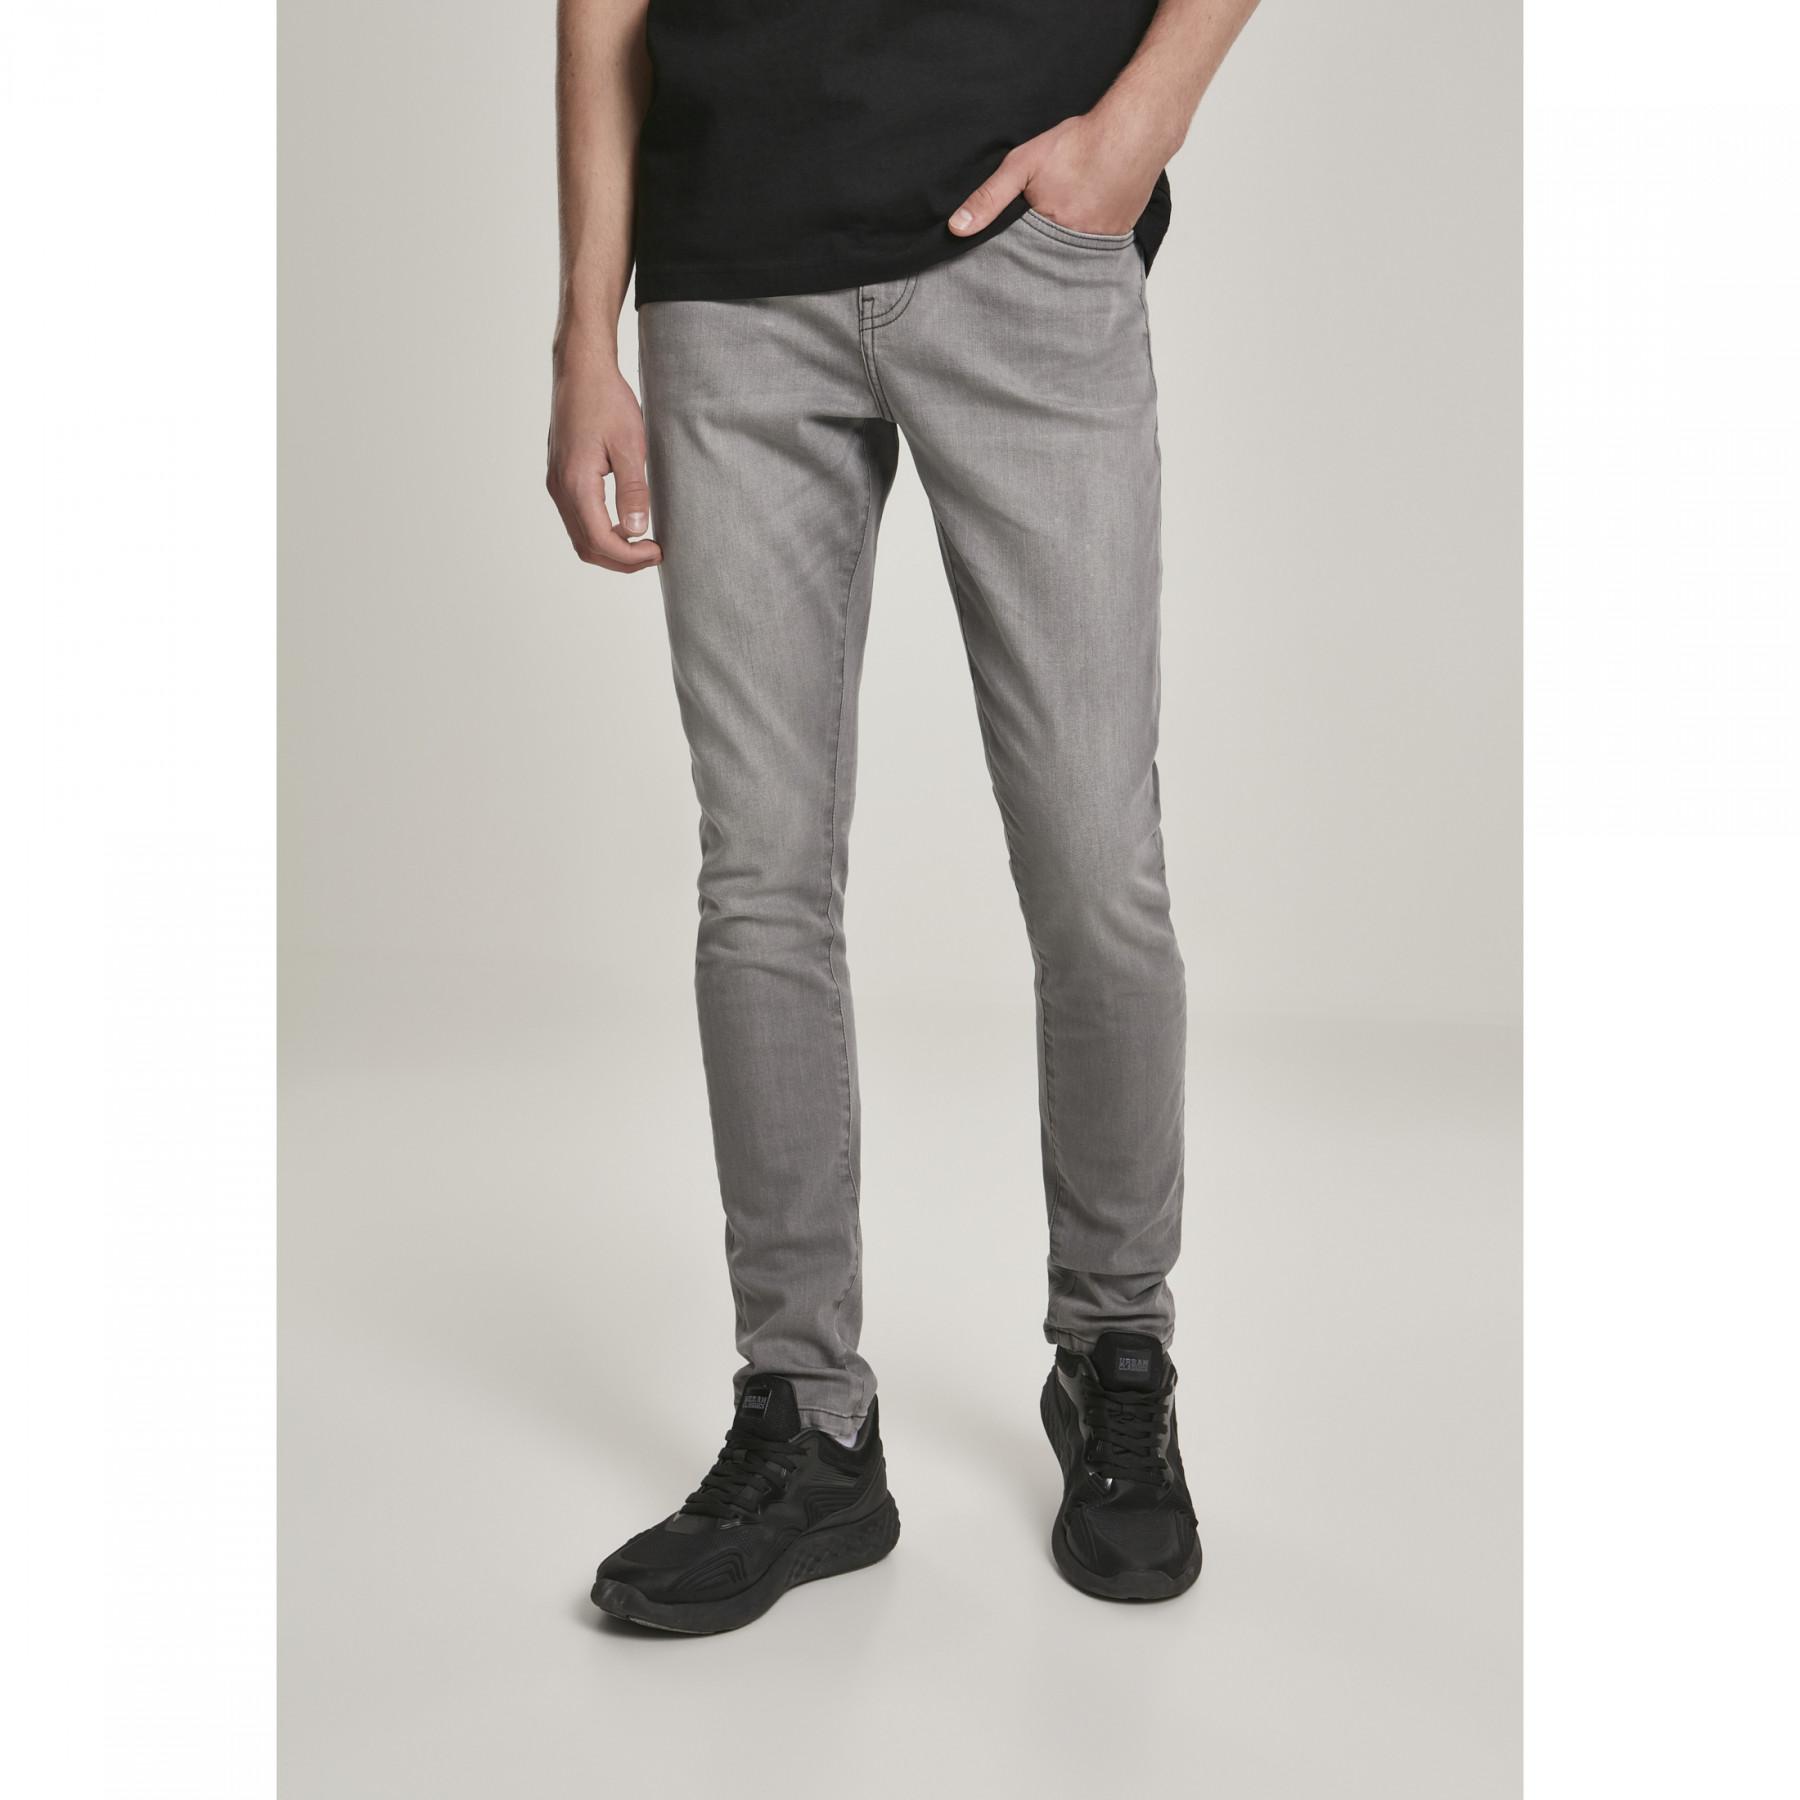 Jeansbyxor Urban Classics slim fit (grandes tailles)